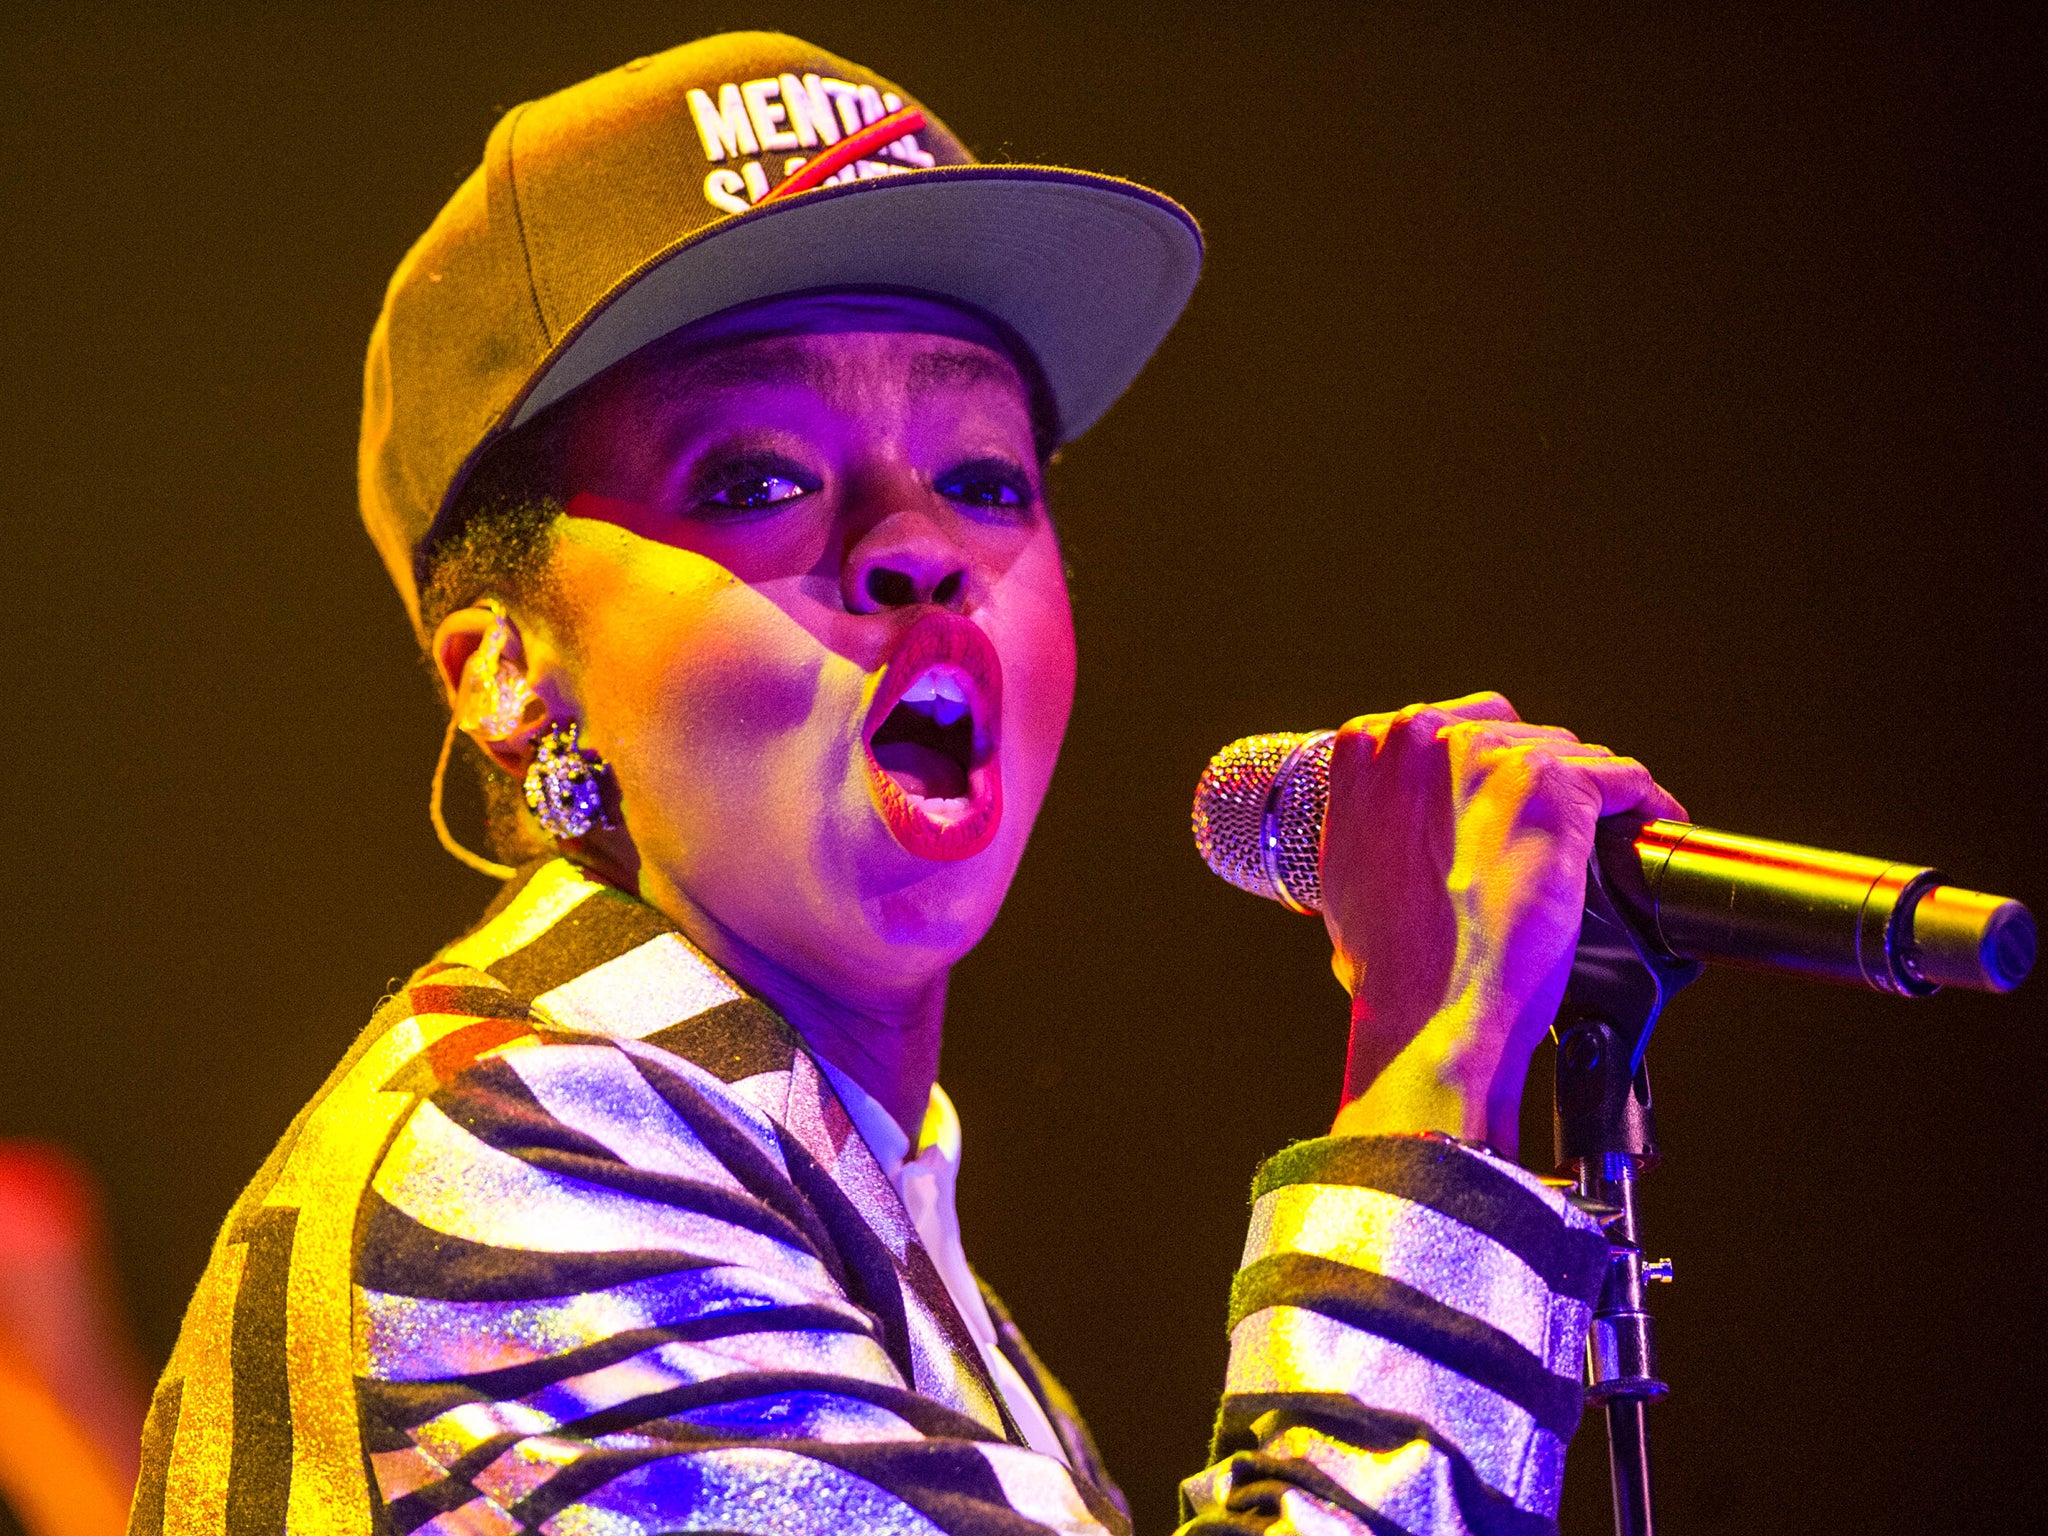 Lauryn Hill performing at the O2 Brixton Academy last night